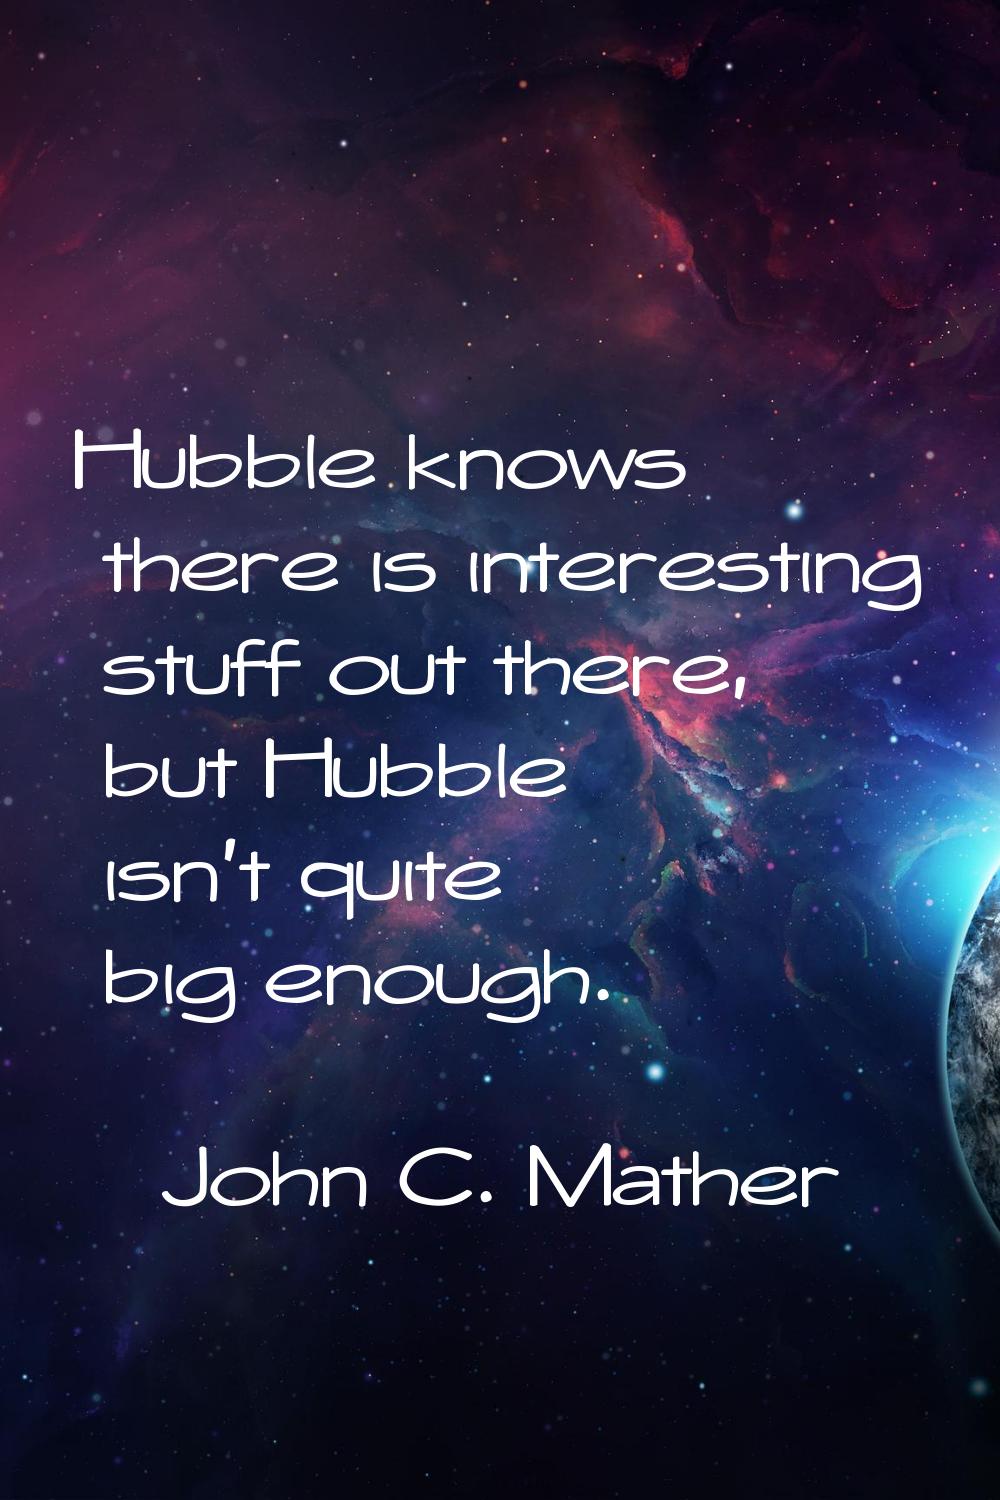 Hubble knows there is interesting stuff out there, but Hubble isn't quite big enough.